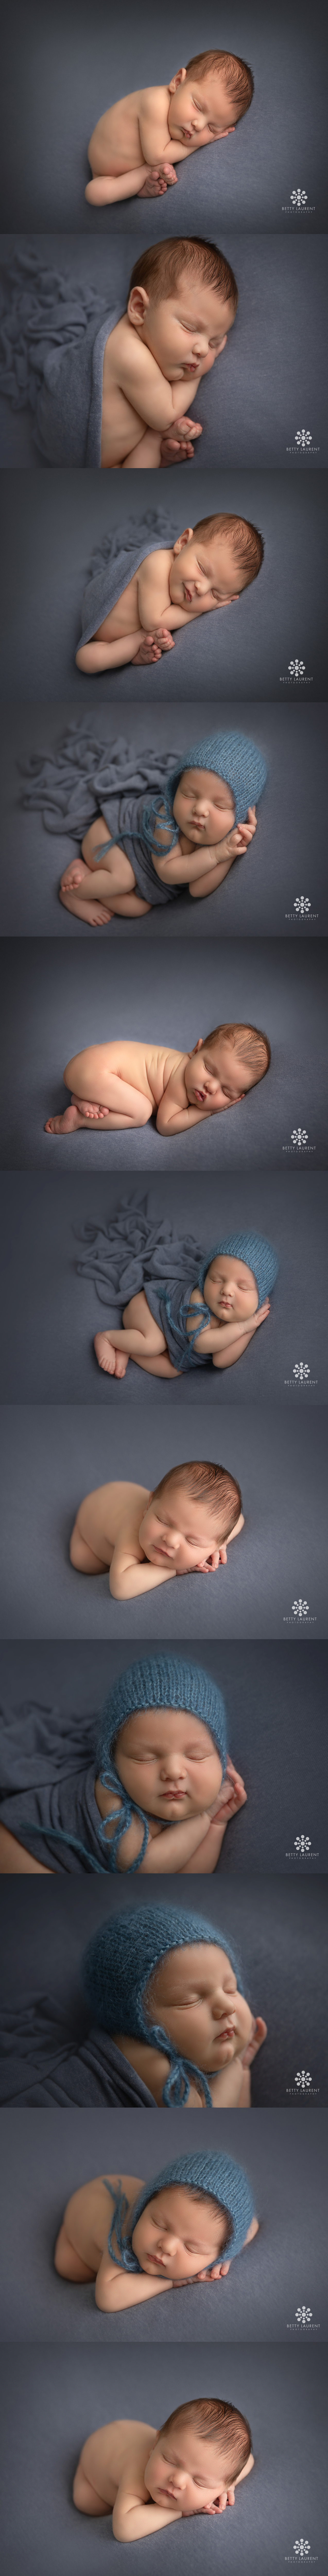 newborn portrait in studio using blue wool props and classic poses on the bean bag